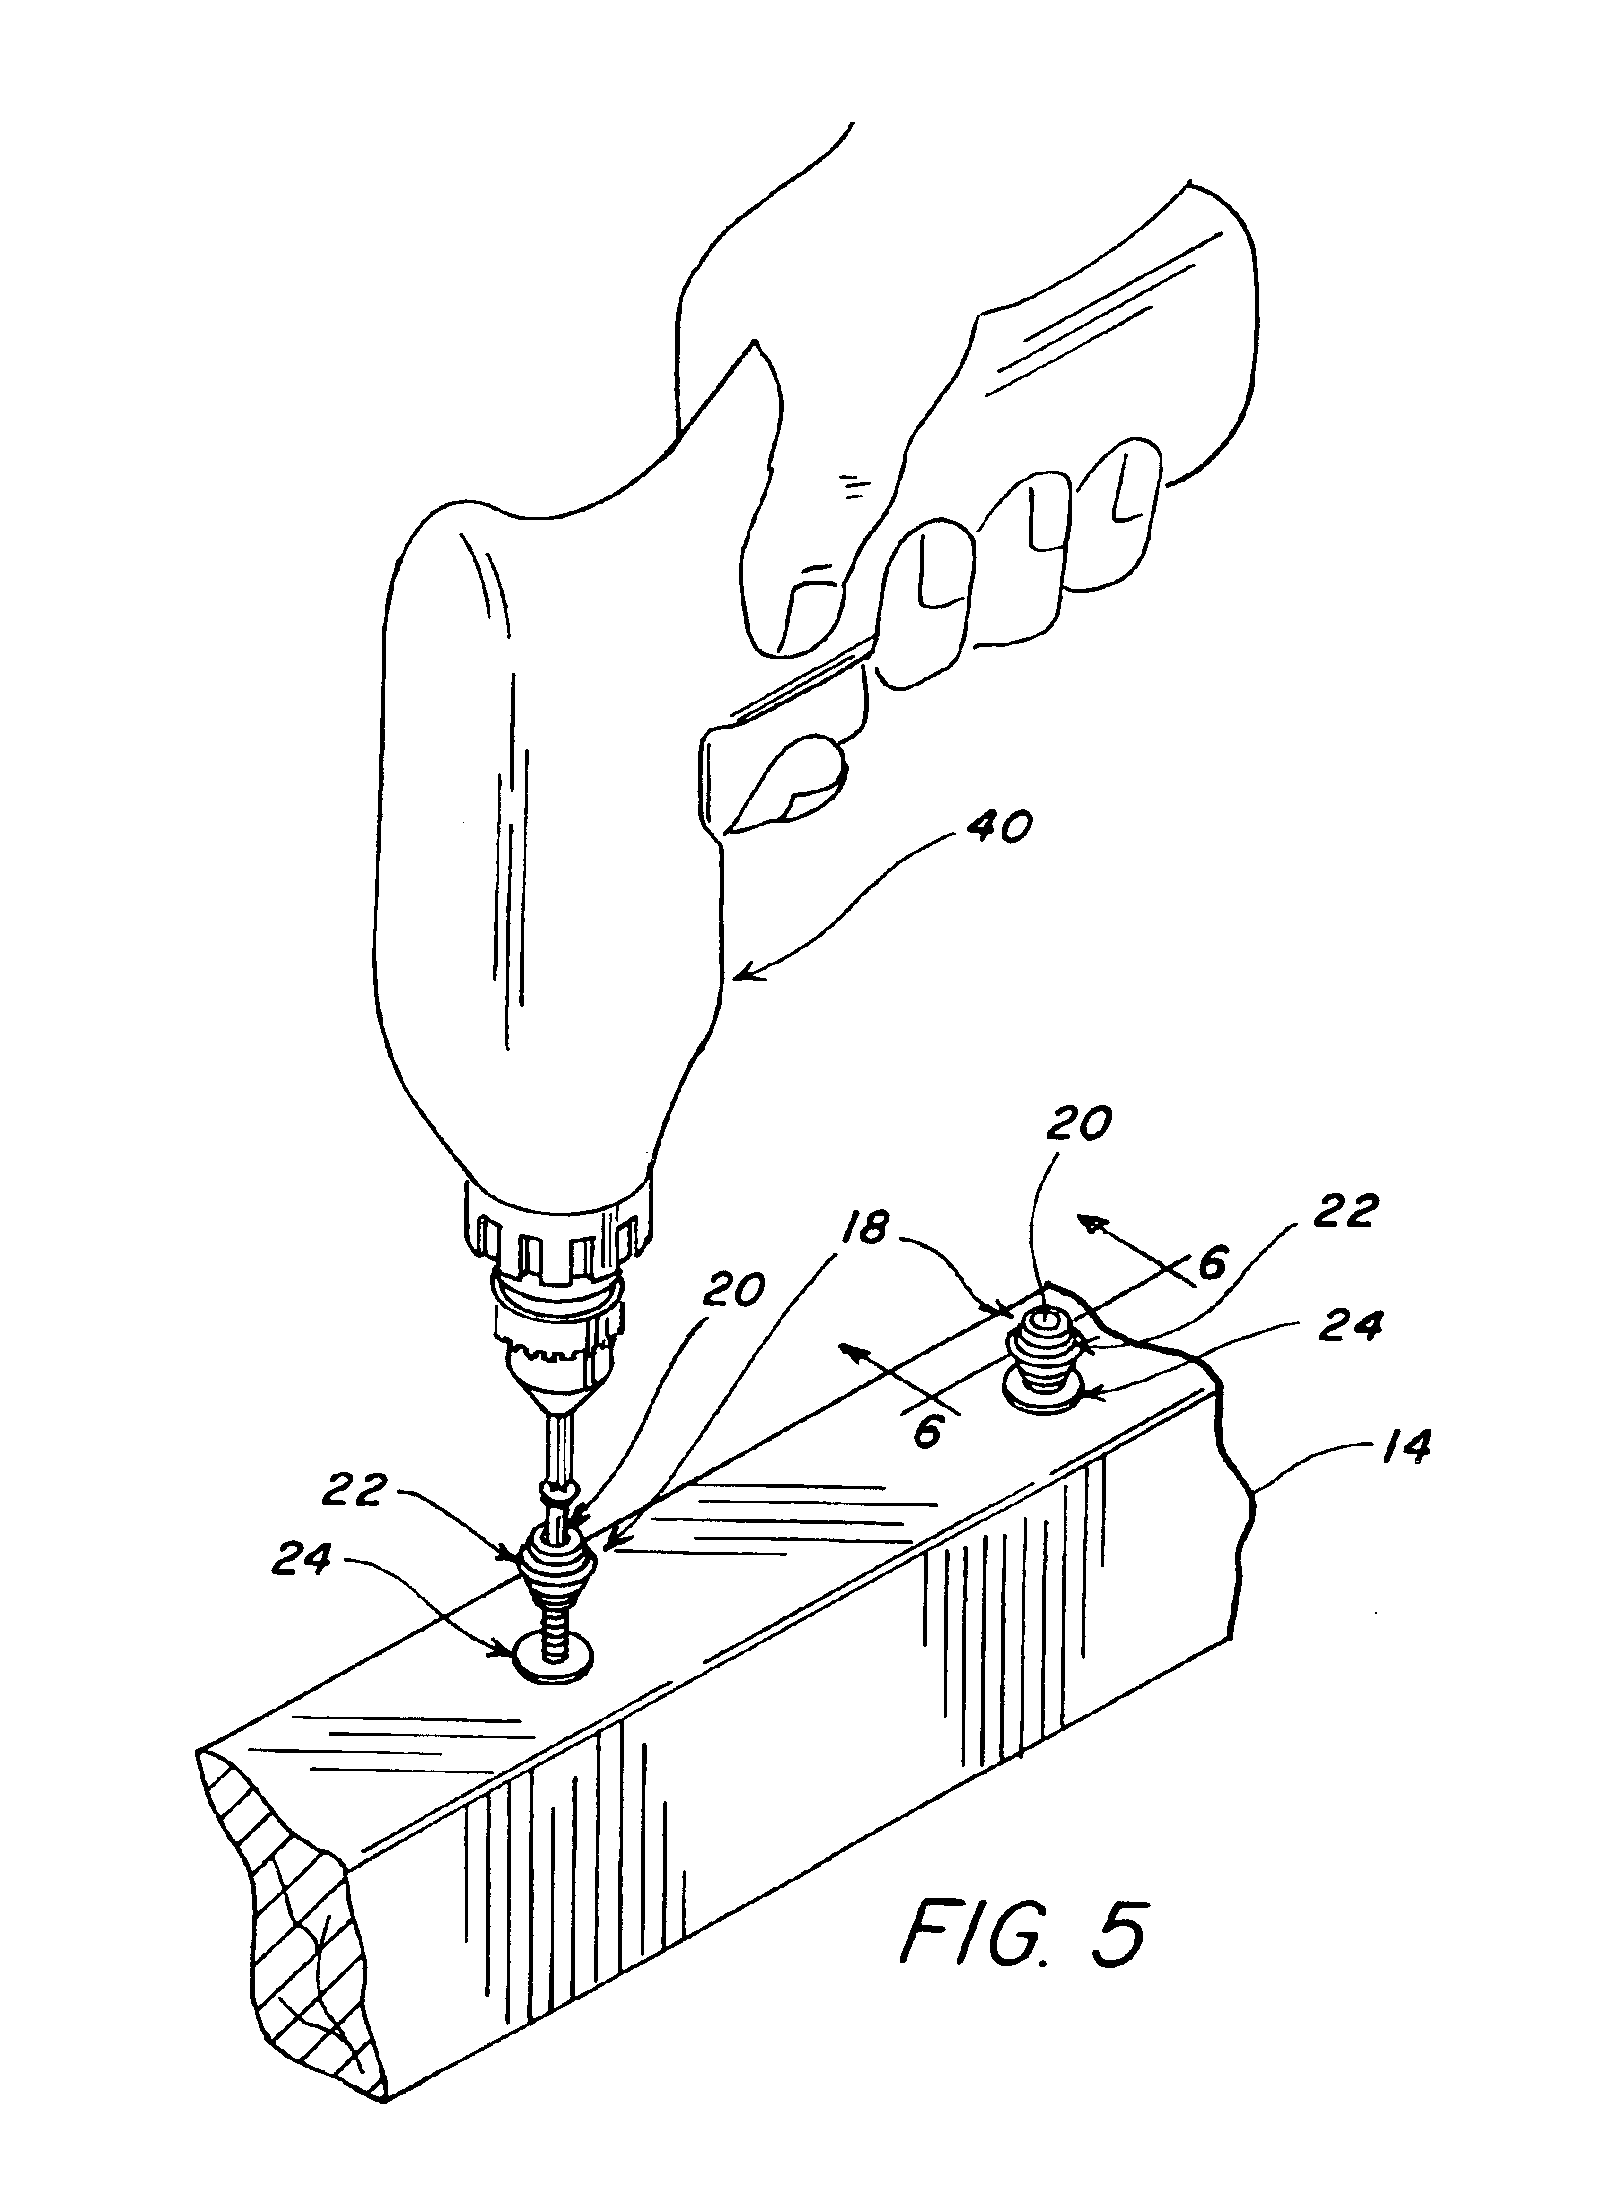 Connectors and railing system having metal balusters isolated from corrosion